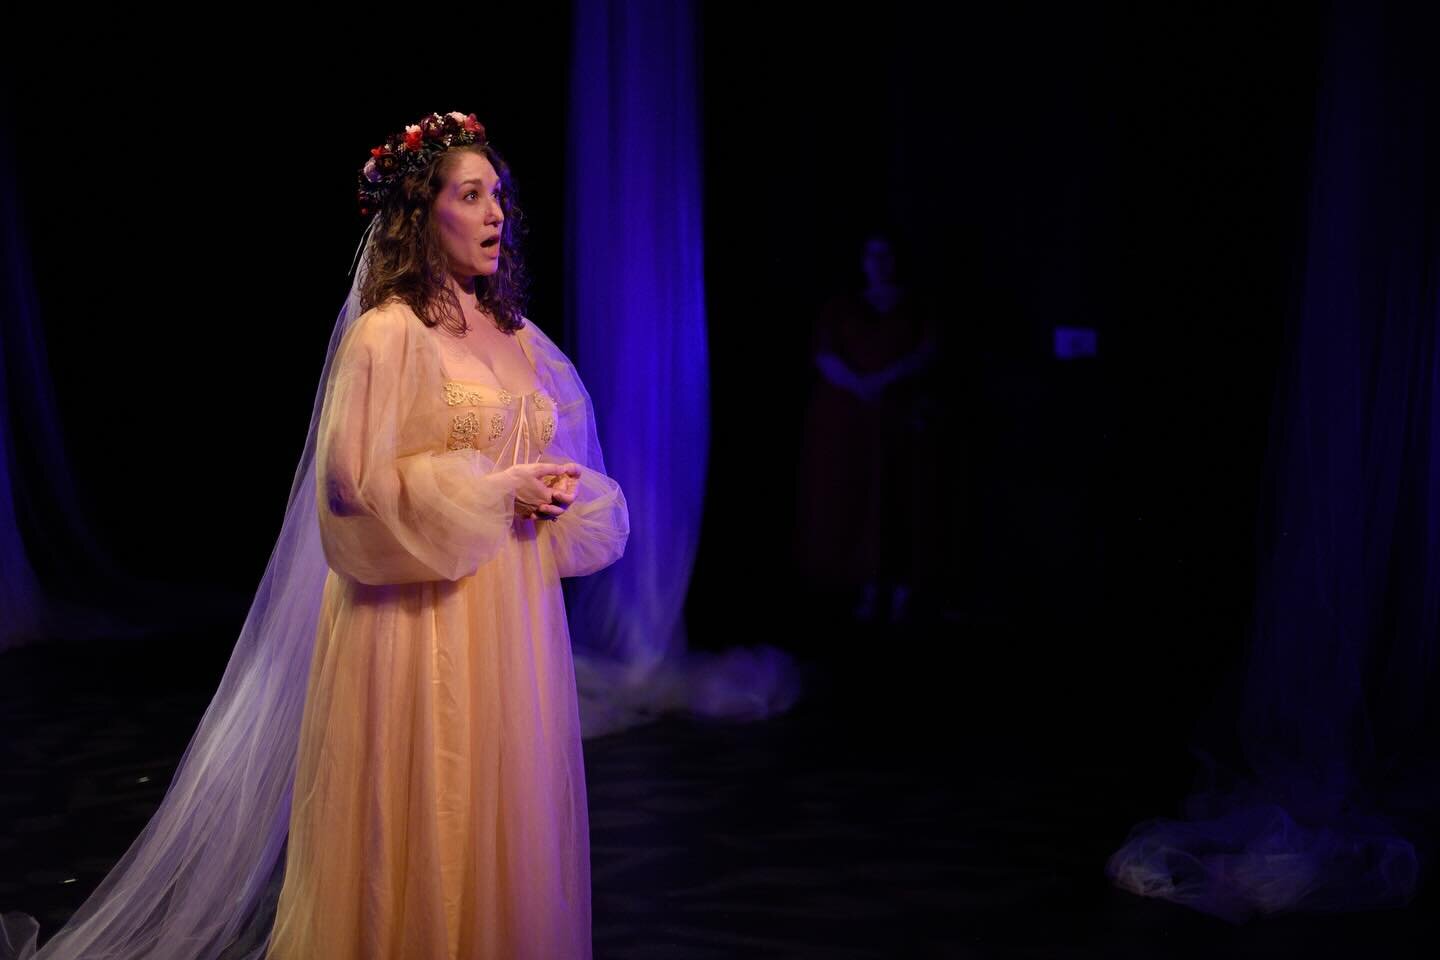 Svadba production photos 🇷🇸 

It&rsquo;s been a wonderfully challenging experience learning the role of Milica, with a few tear your hair out moments followed by breakthrough joy. Friends, Svadba is not for the musically faint of heart! It&rsquo;s 